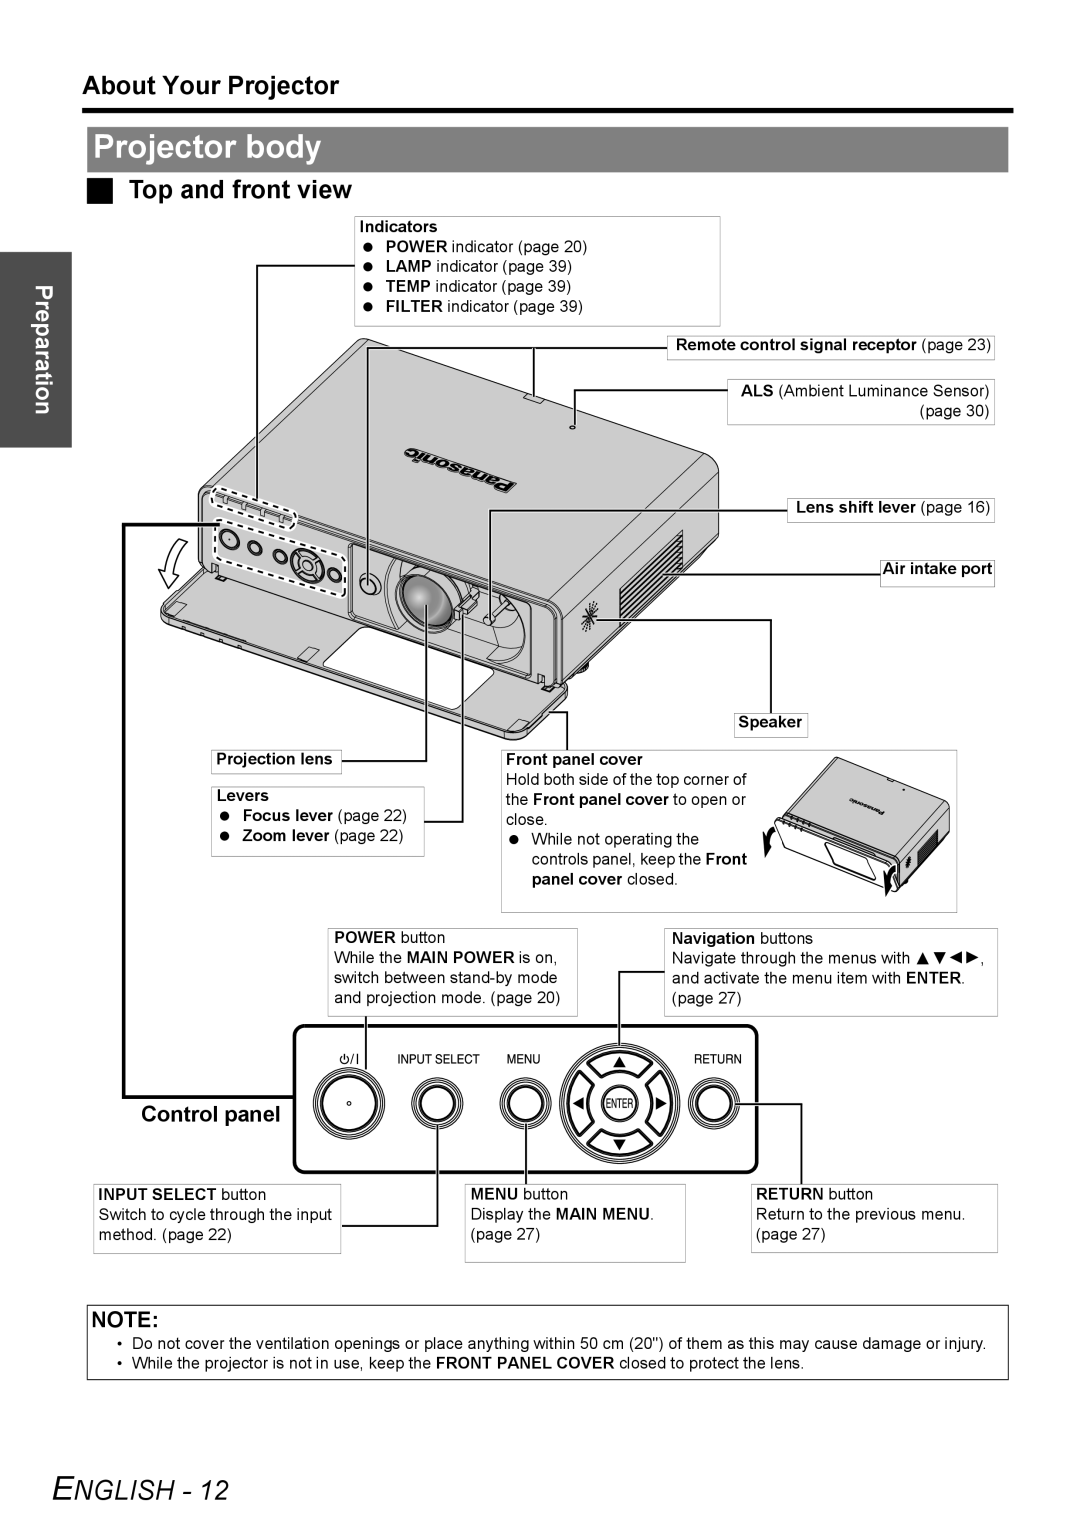 Philips PT-FW100NTU manual Projector body, About Your Projector, Top and front view, Control panel, English, Preparation 